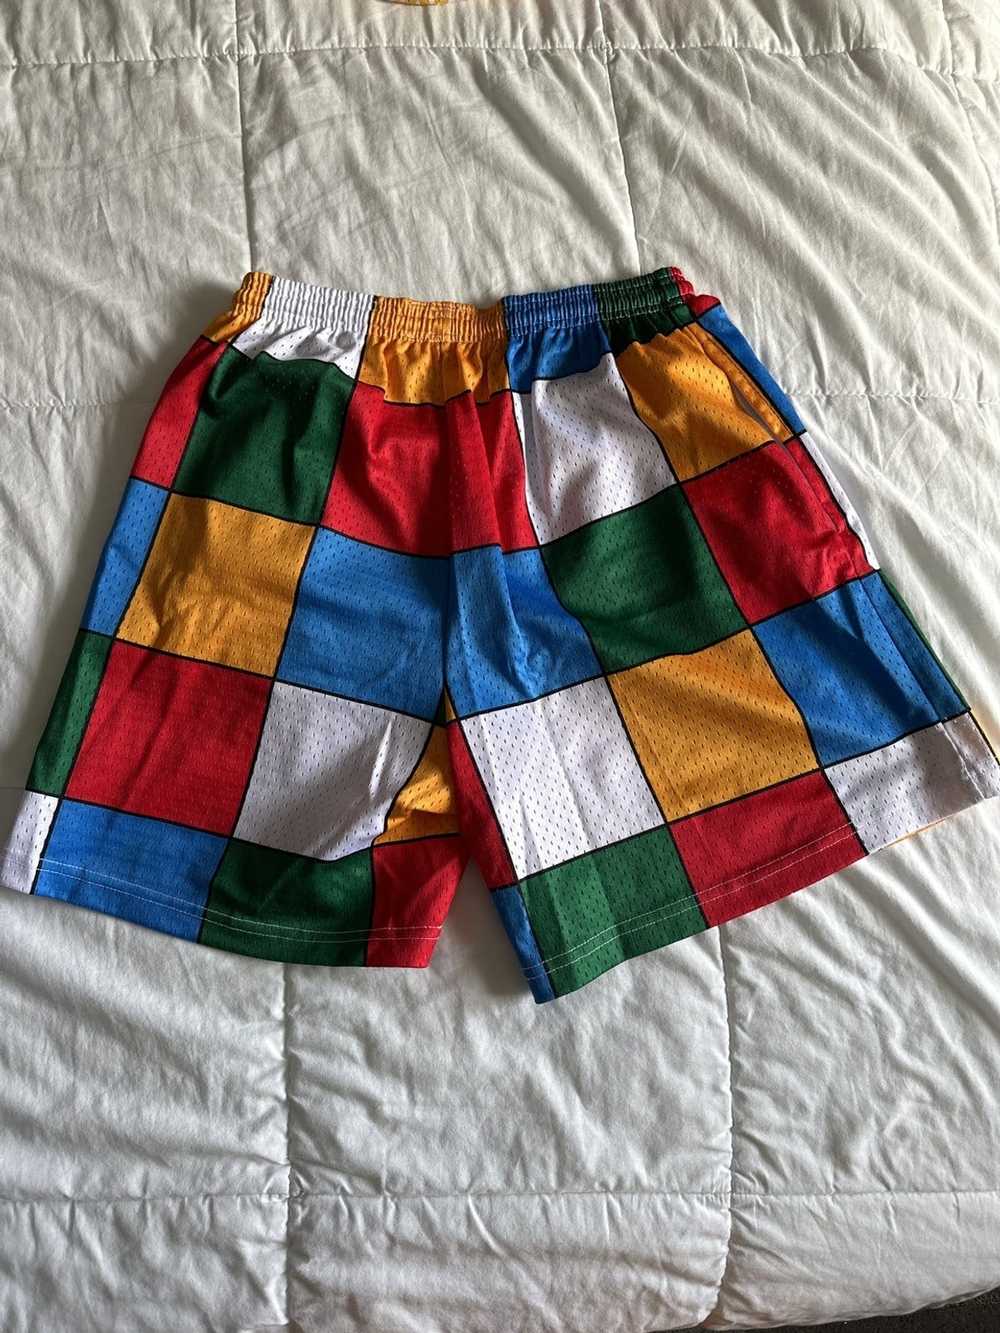 Lost × Streetwear Lost Files Square Shorts Size L - image 3